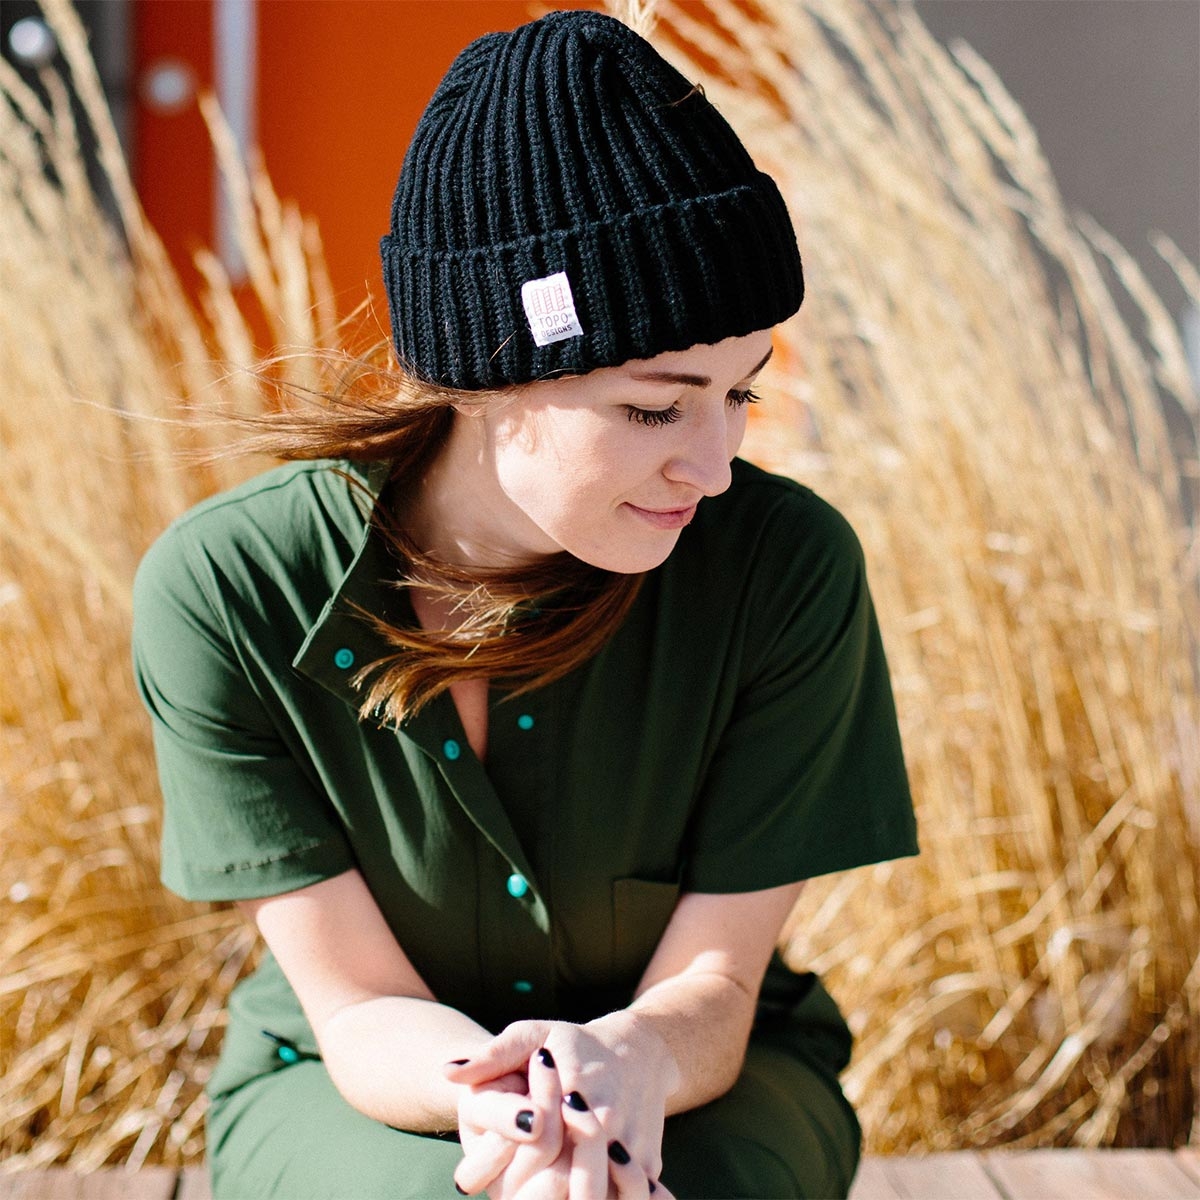 Topo Designs Wool Beanie Black, 100% merino wool beanie features a chunky, loose knit weave.